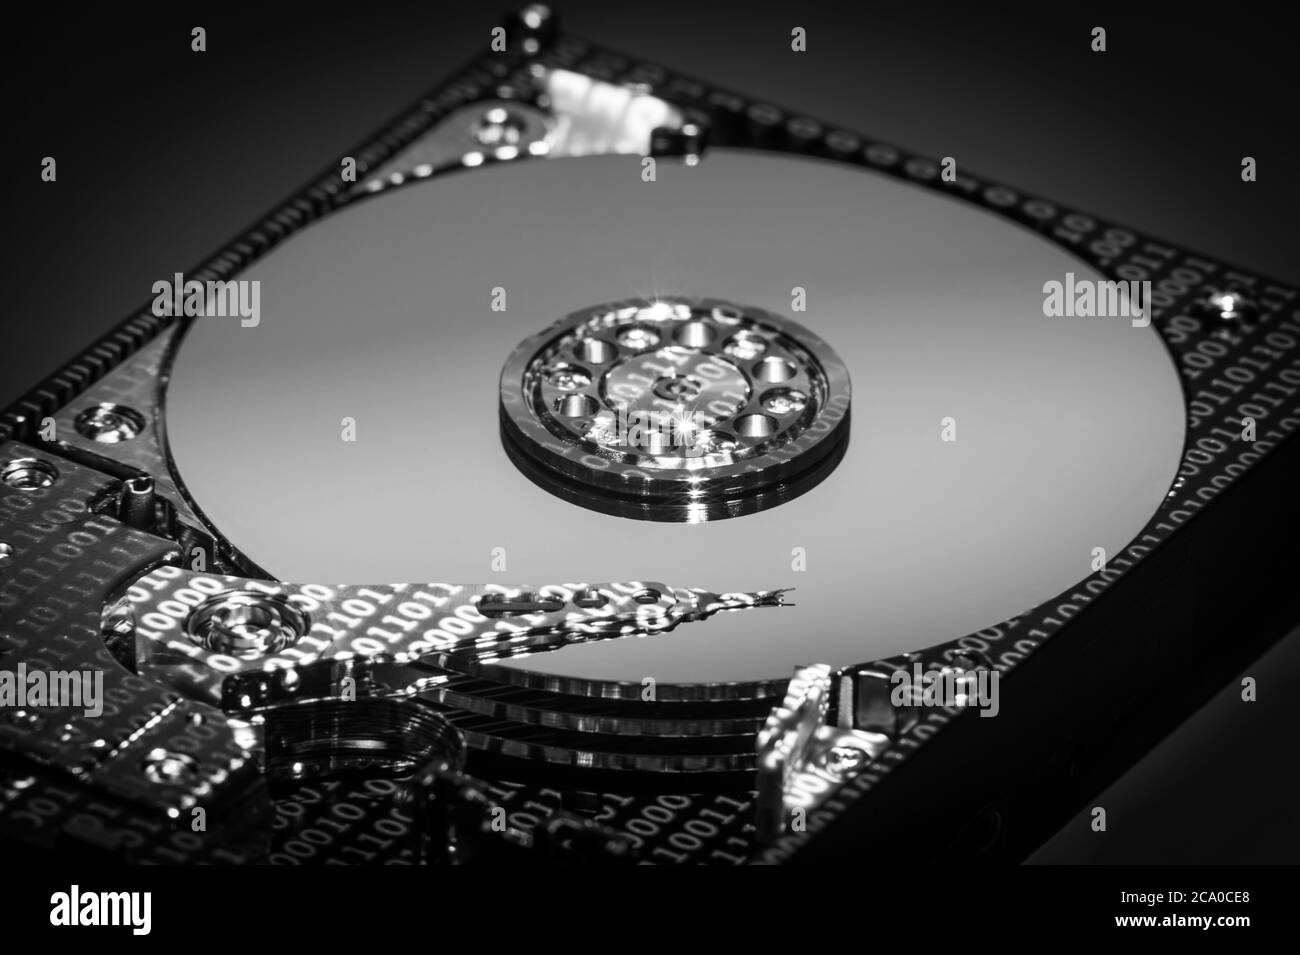 A hard disk drive (HDD)  with data projected on it. Stock Photo